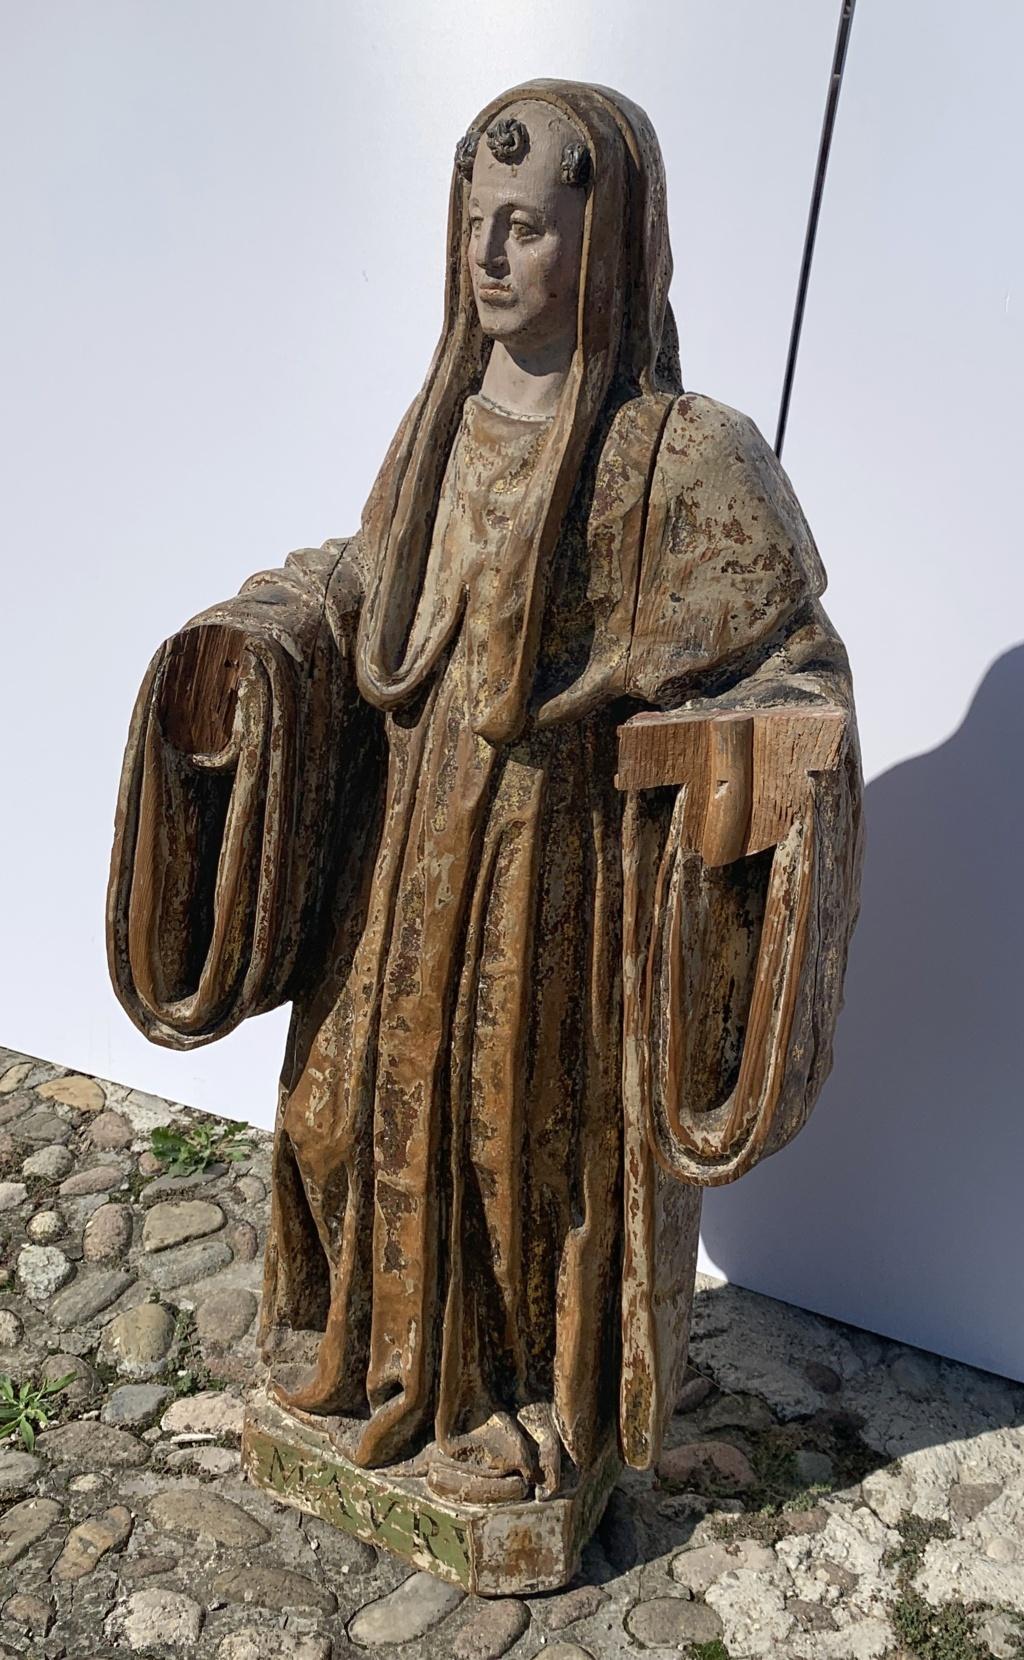 Carved wooden sculpture - San Mauro. Italy, 16th century.

54 x 30 x h 110 cm.

Entirely in carved and painted wood with traces of polychromy and gilding.

- Work registered at the base: 